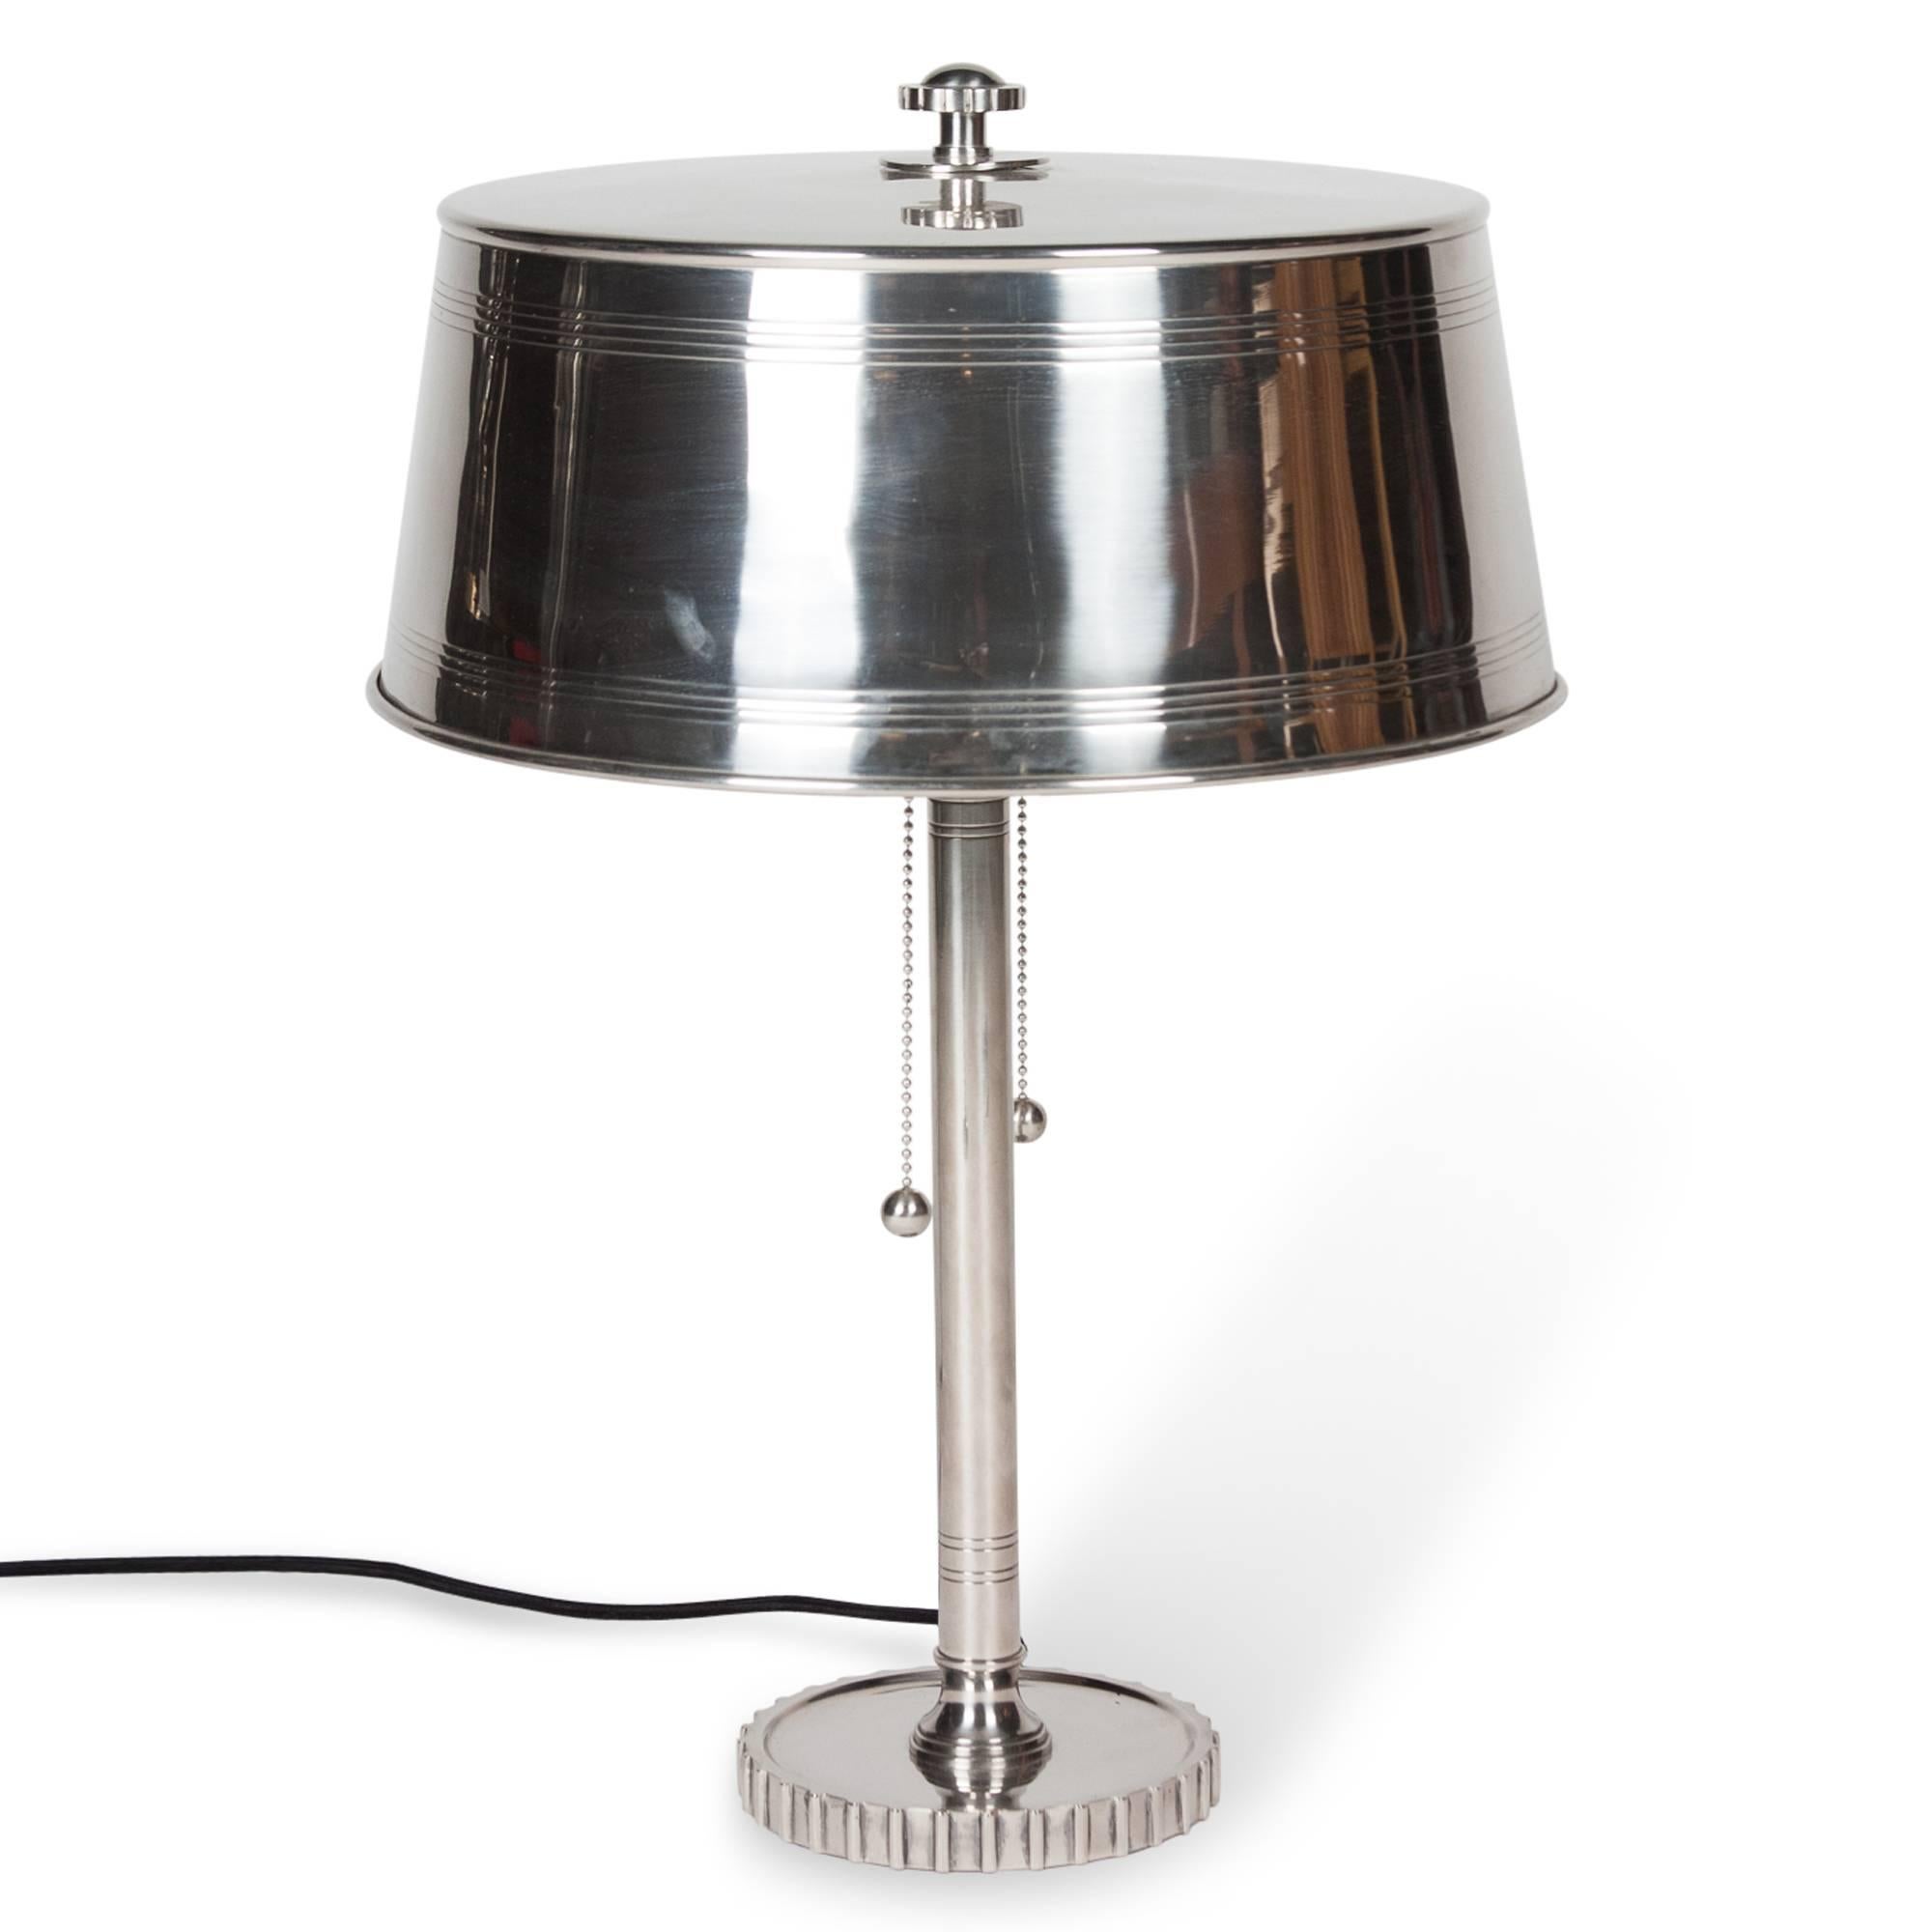 Rare Early American Art Deco Lamp by Walter Kantack In Excellent Condition For Sale In Hoboken, NJ